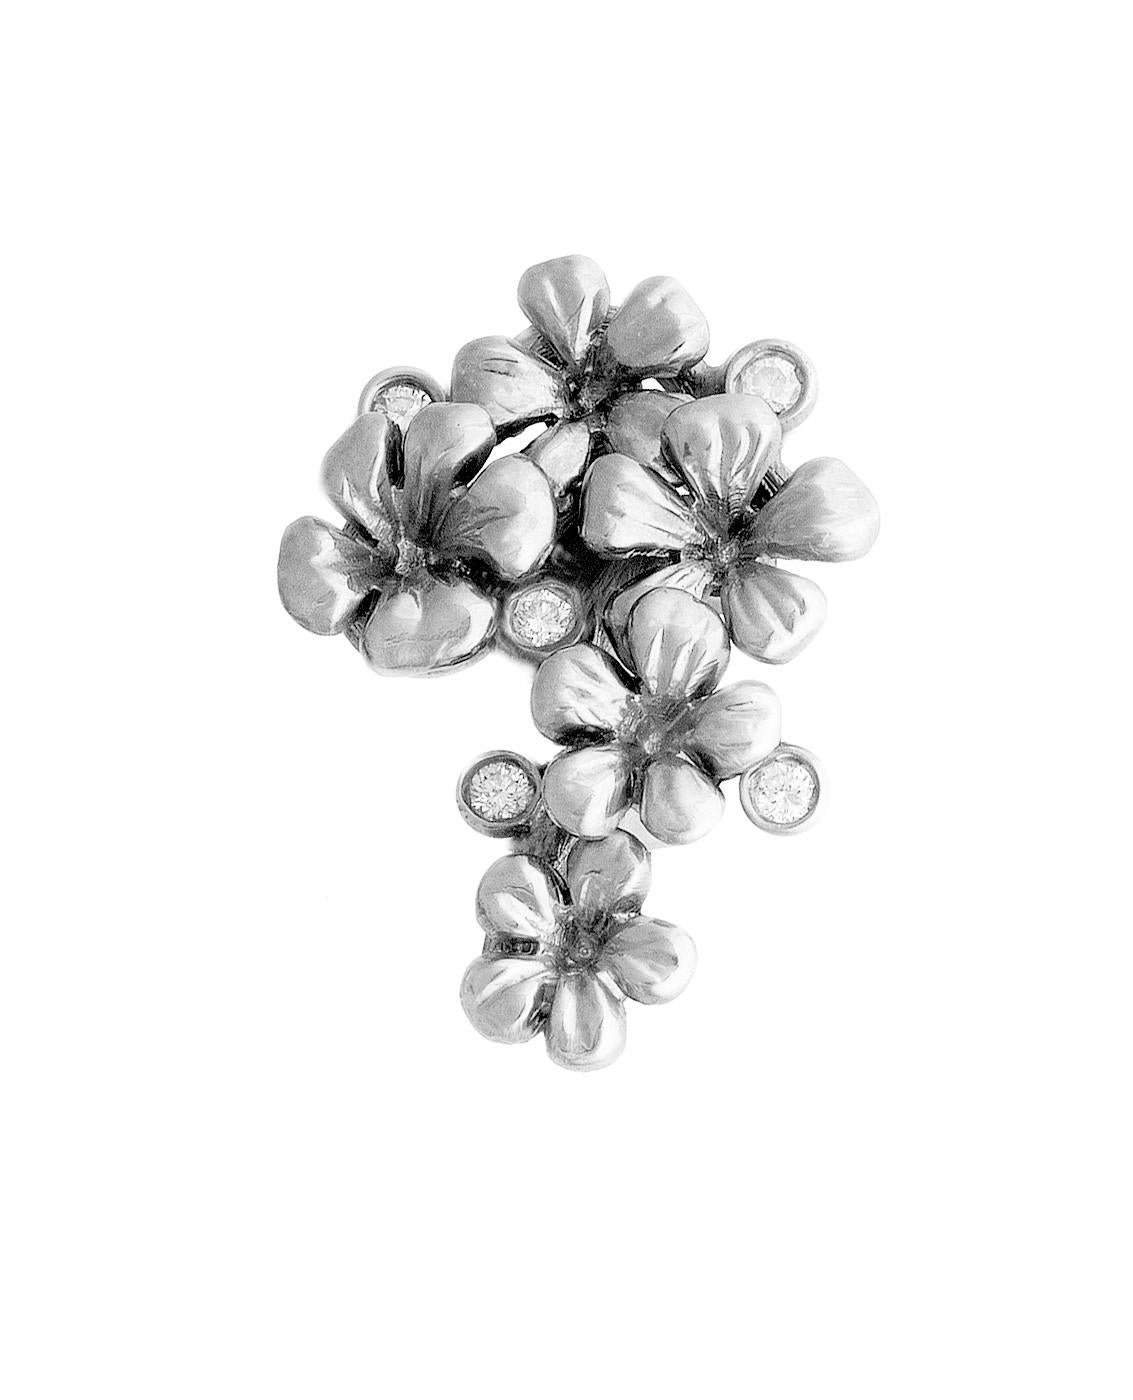 The sterling silver Plum Blossom Modern style Pendant Necklace features 5 round natural topazes. This jewelry collection has been featured in Vogue UA and Harper's Bazaar reviews.

The unique sculptural design adds extra highlights to the surface of